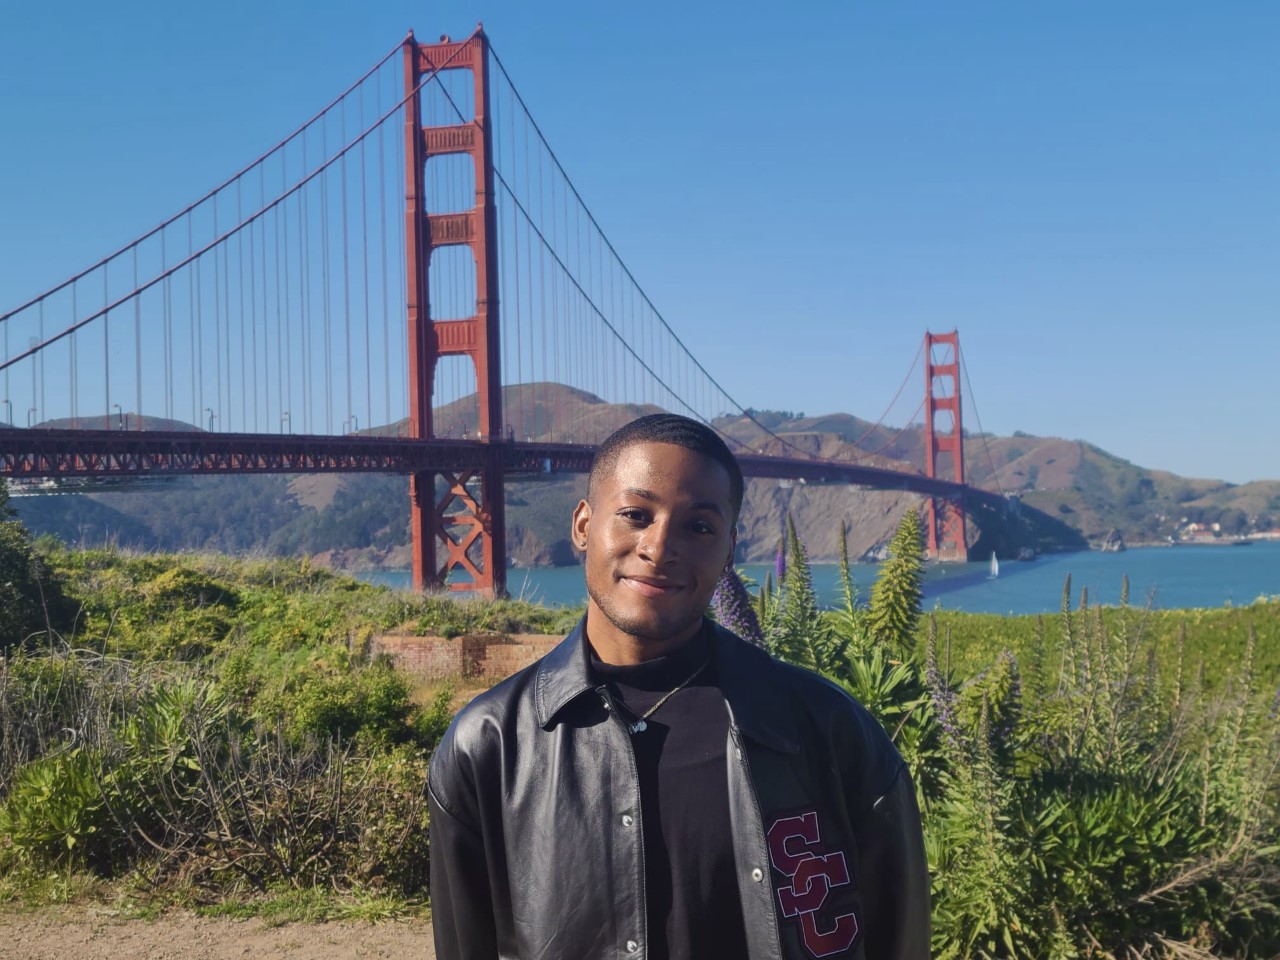 A person with short hair stands in front of the Golden Gate Bridge. They are smiling and wearing a leather jacket.